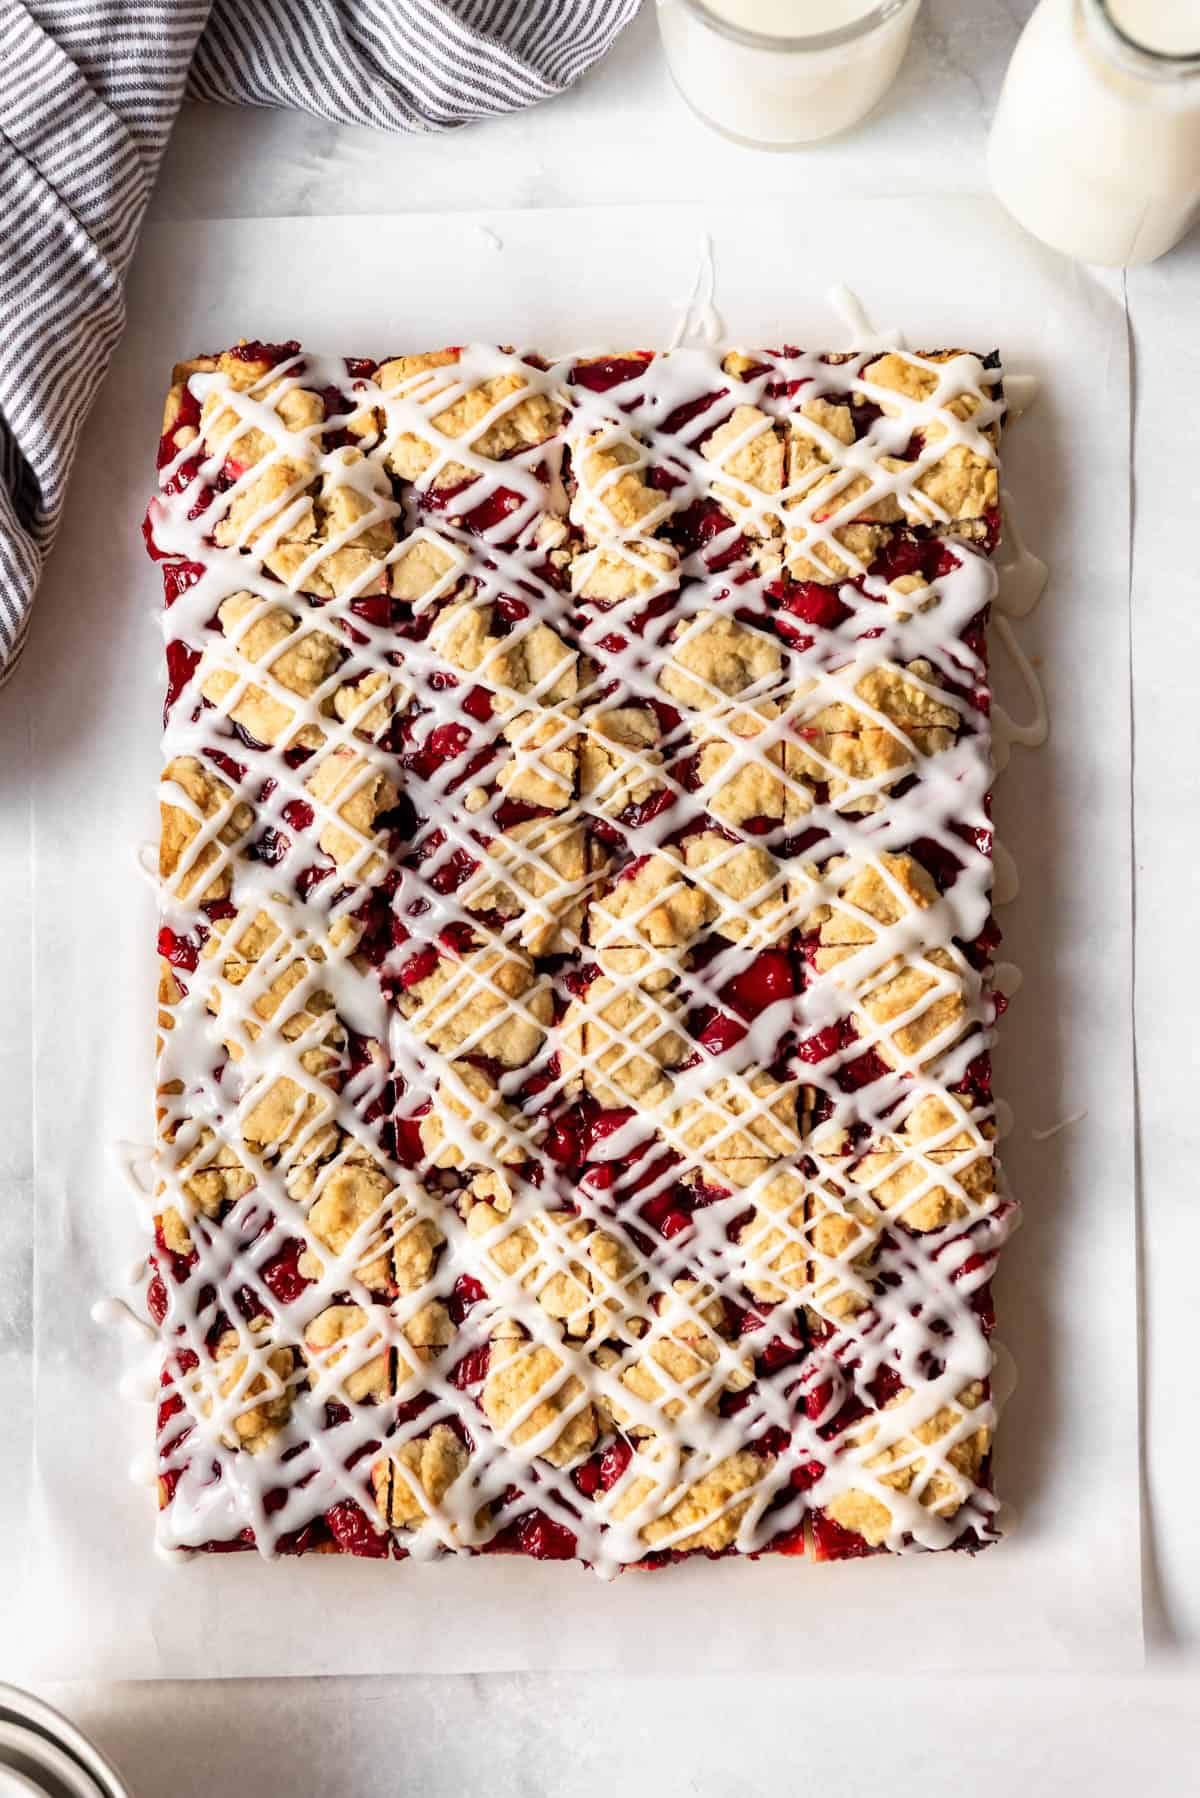 Adding zigzags of a simple glaze over cherry pie bars.